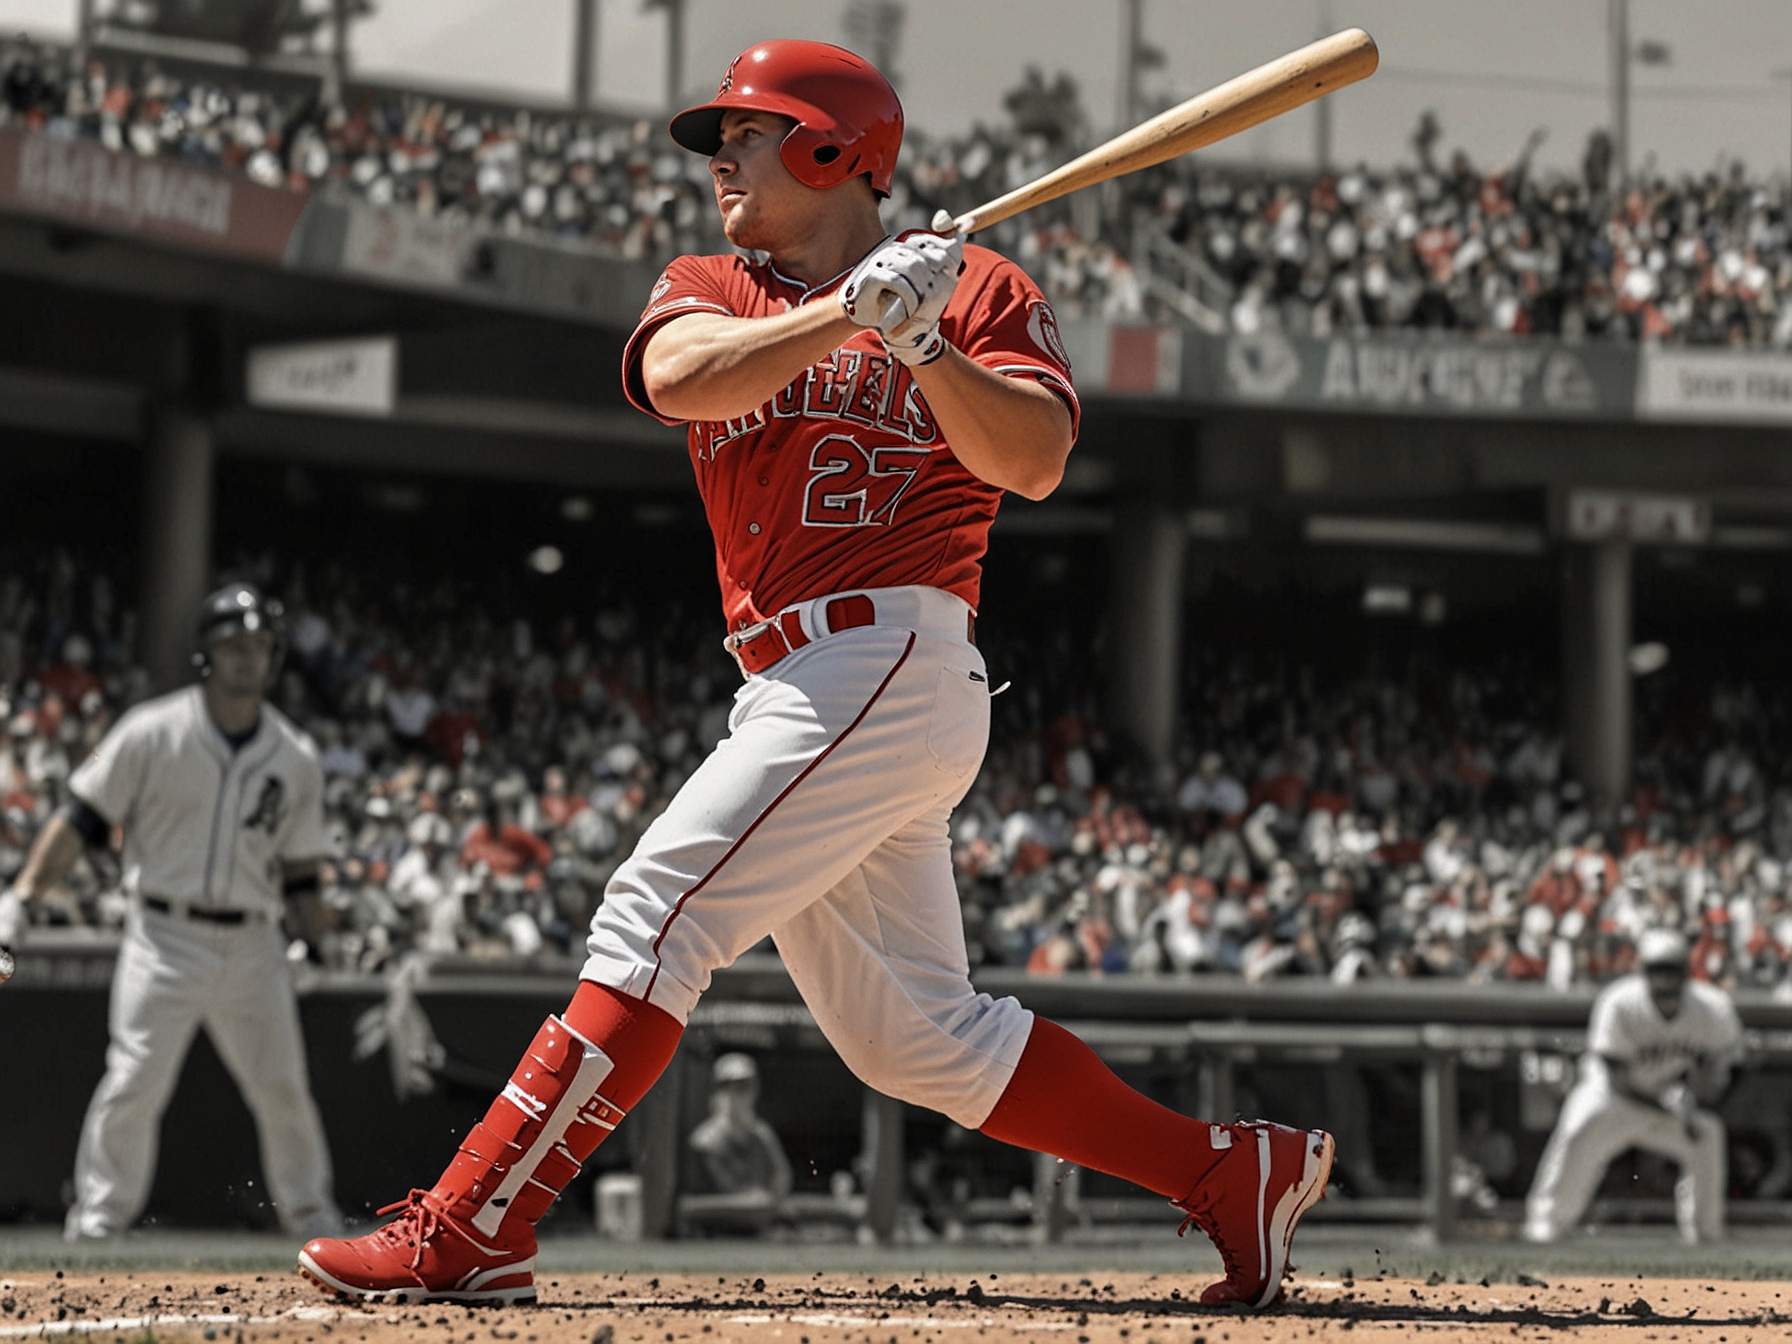 Mike Trout hits a pivotal two-run home run in the 7th inning, tying the game and energizing the crowd, as the Los Angeles Angels battle the Detroit Tigers at Angel Stadium.